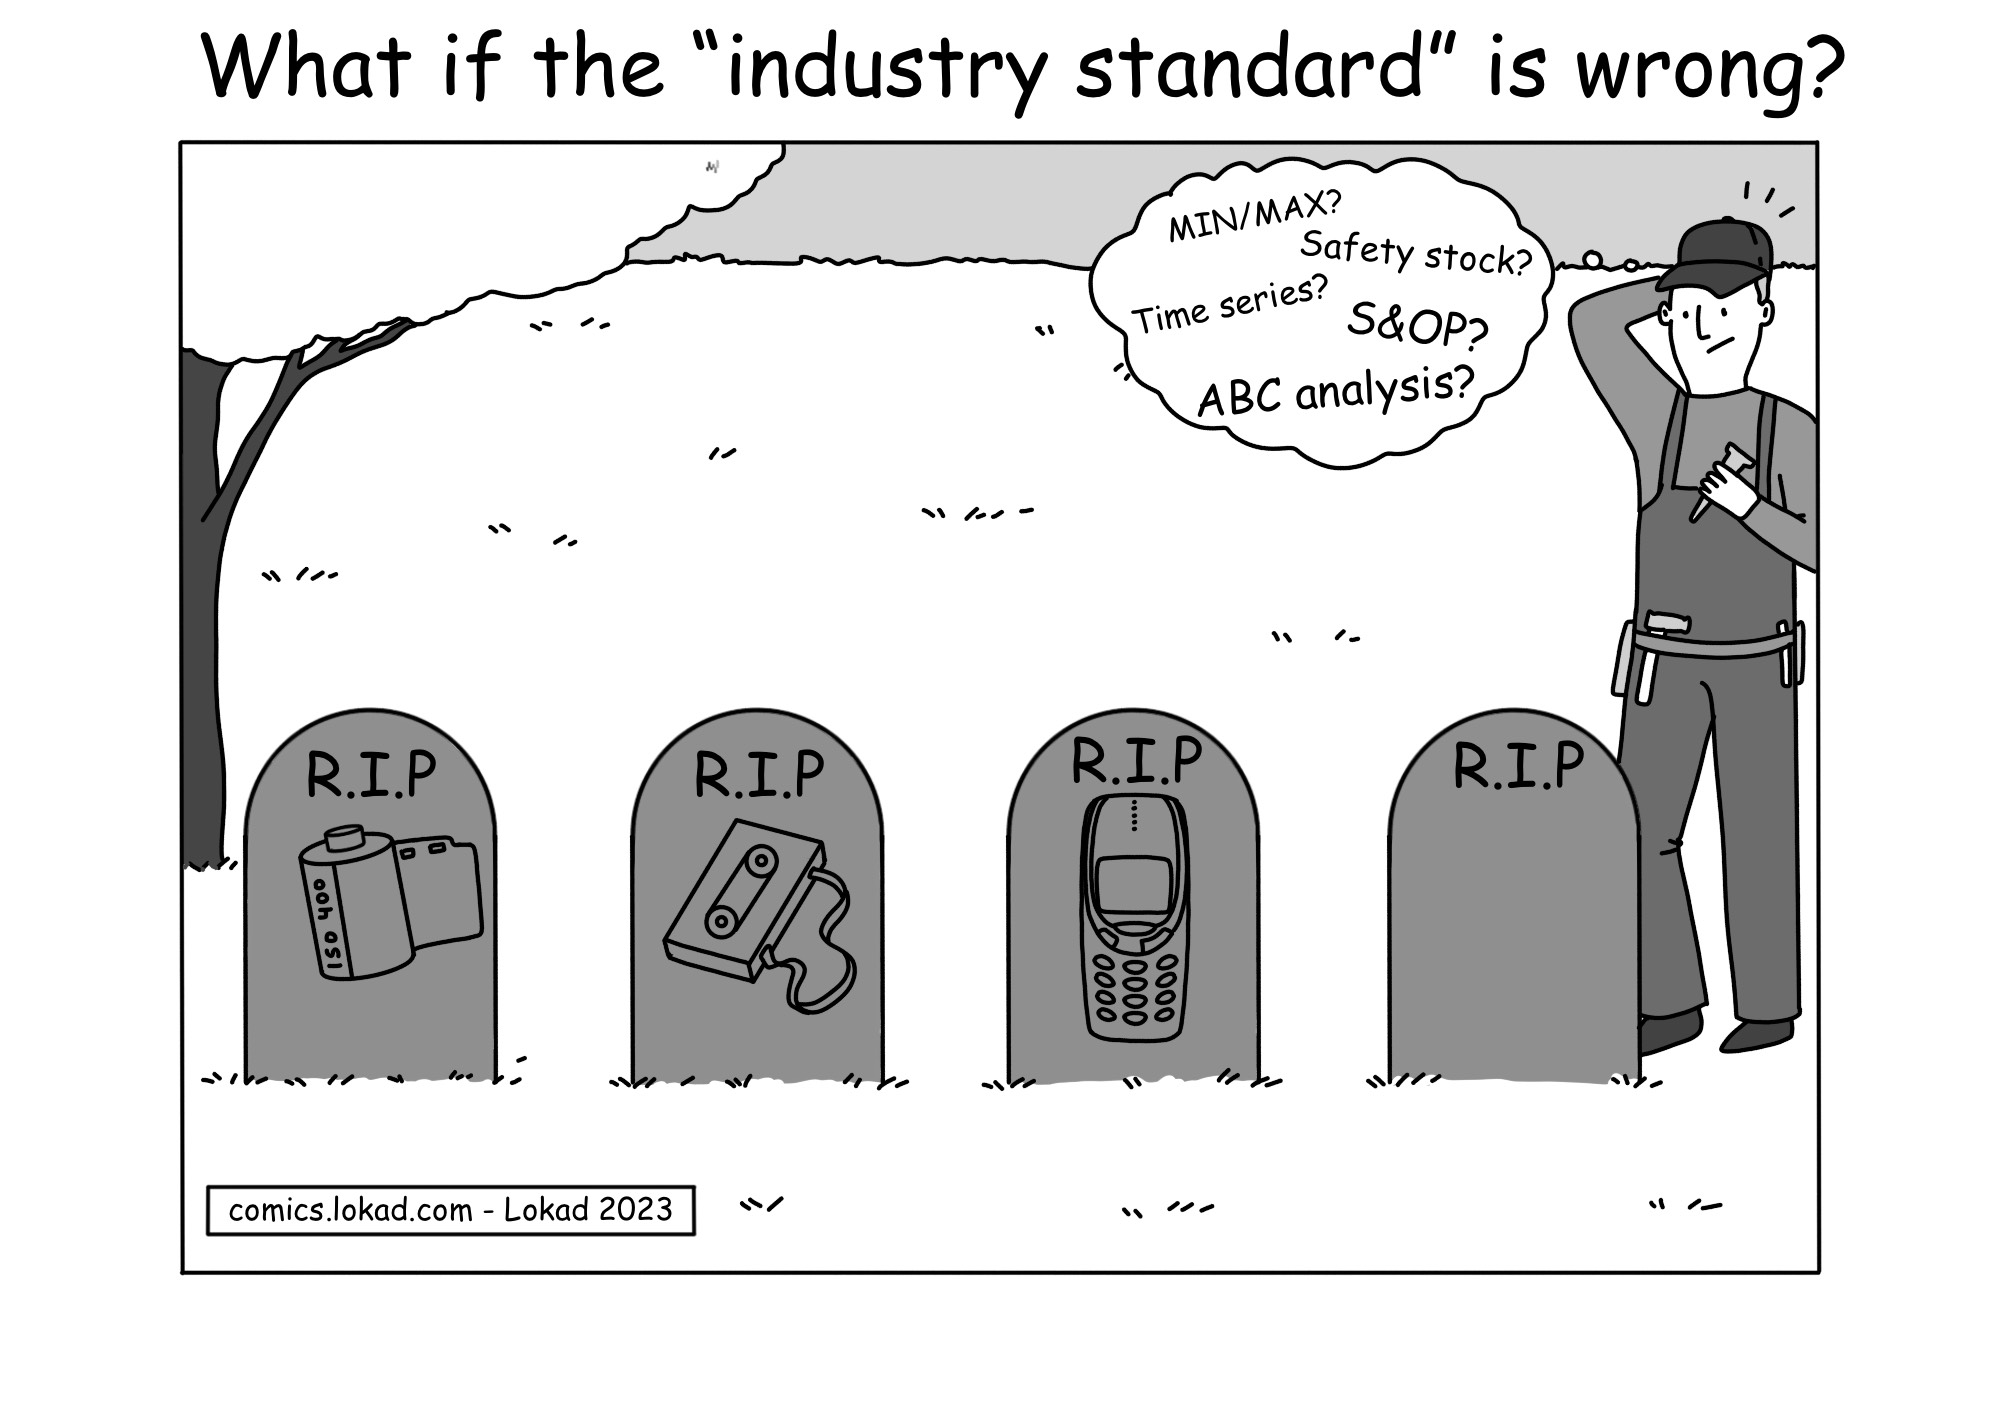 What if the industry standard is wrong?